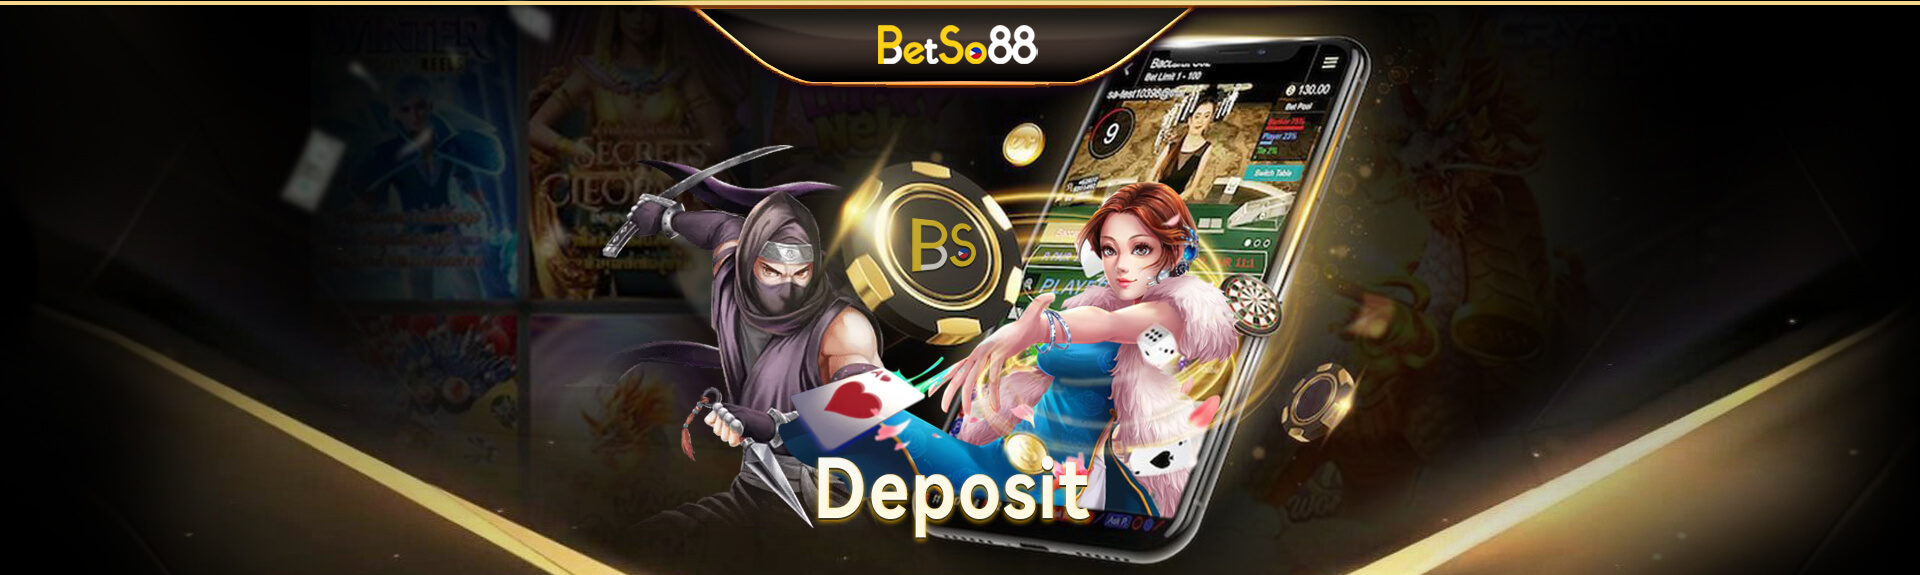 Secure Deposits: betso88 Ensures a Trusted Online Casino Experience